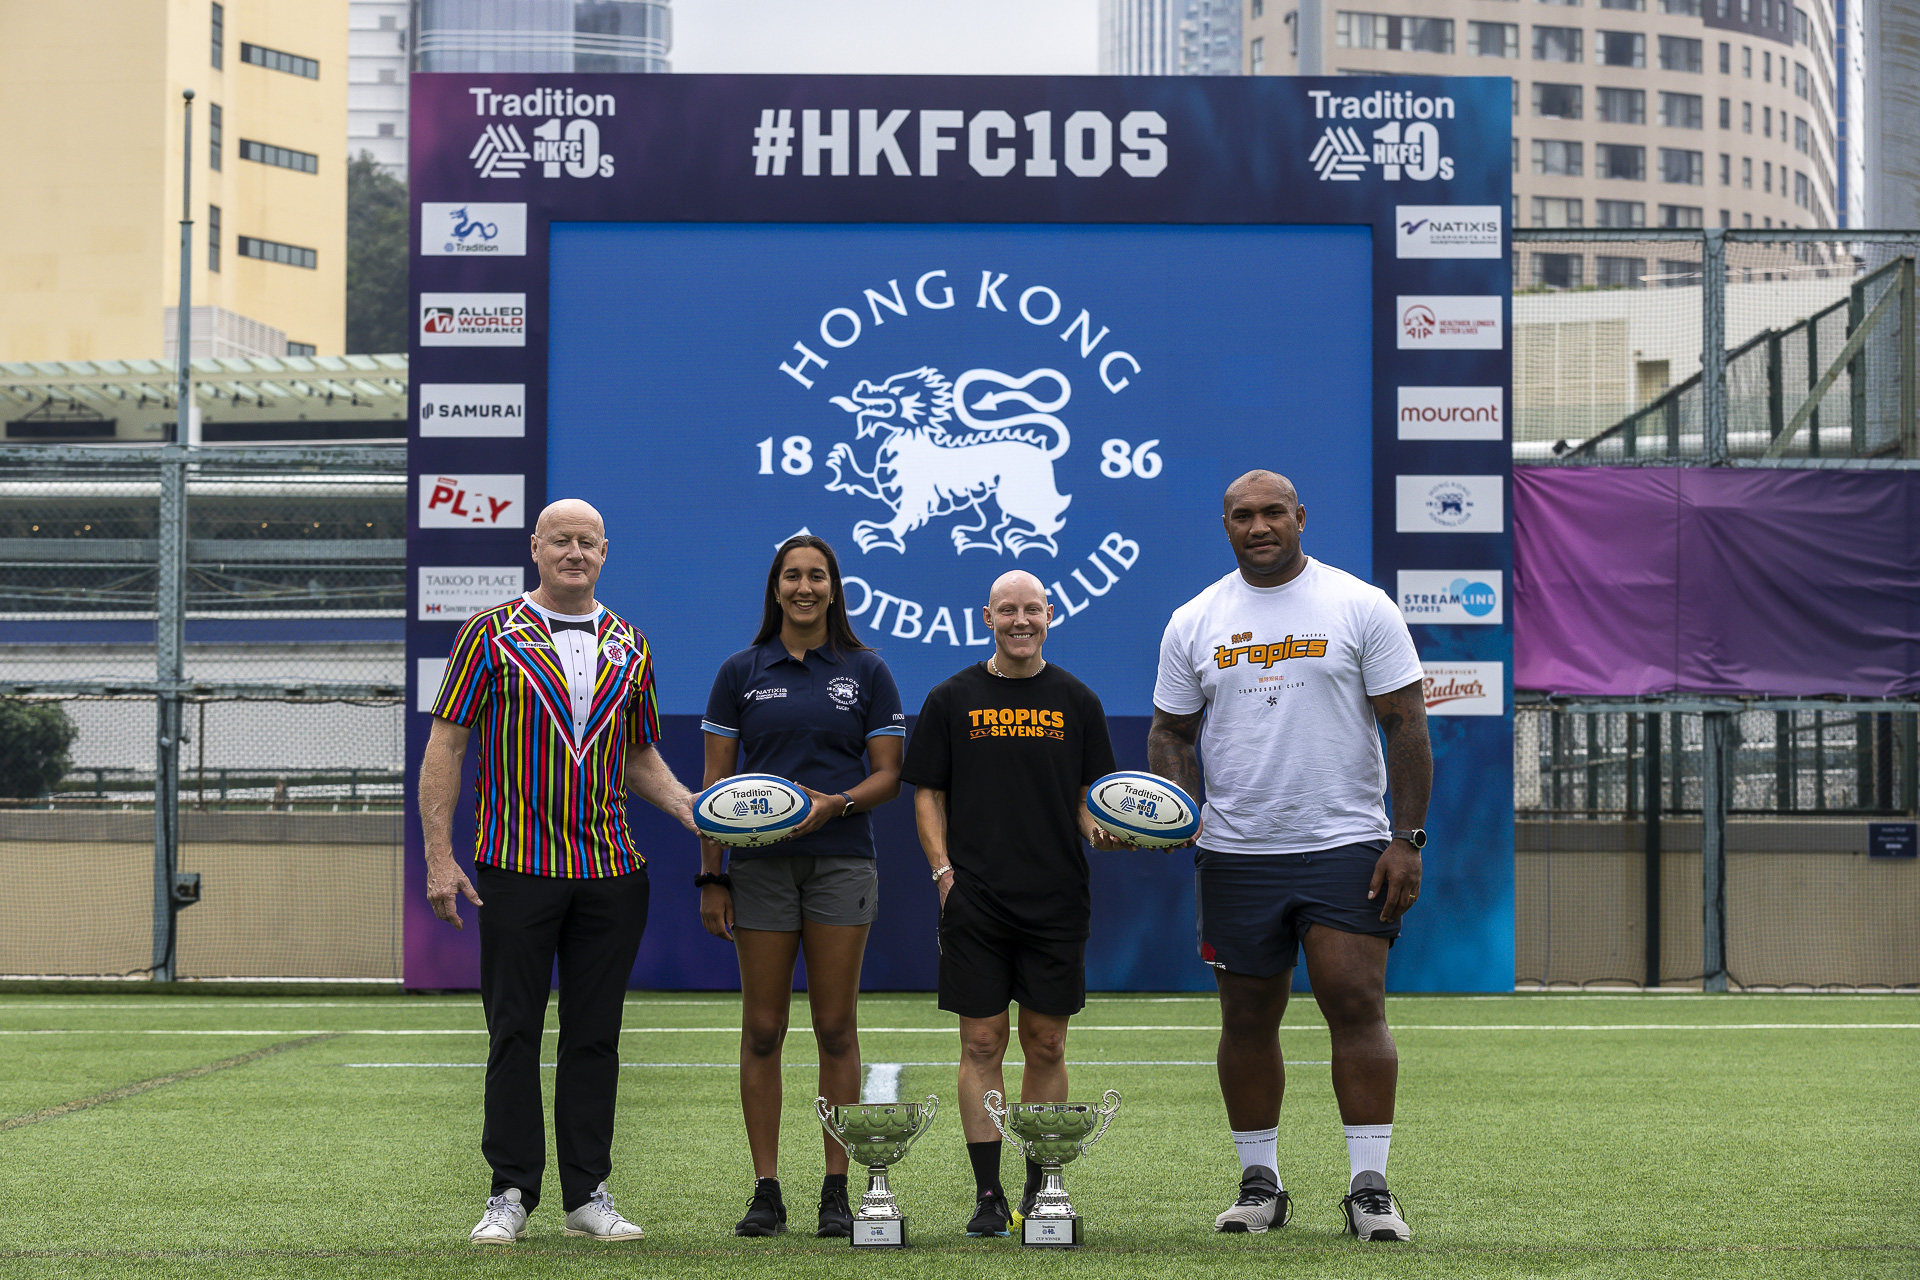 Heralding the Tradition Hong Kong 10s are (from left): Simon Ryan, coach of men’s champions Tradition YCAC; Roshini Turner of HKFC Natixis Ice; Heather Fisher, manager of the Ashbury Tropics; and former Fijian international Nemani Nadolo, who will play for the Tropics. Photo: Chris Wong/Ike Image